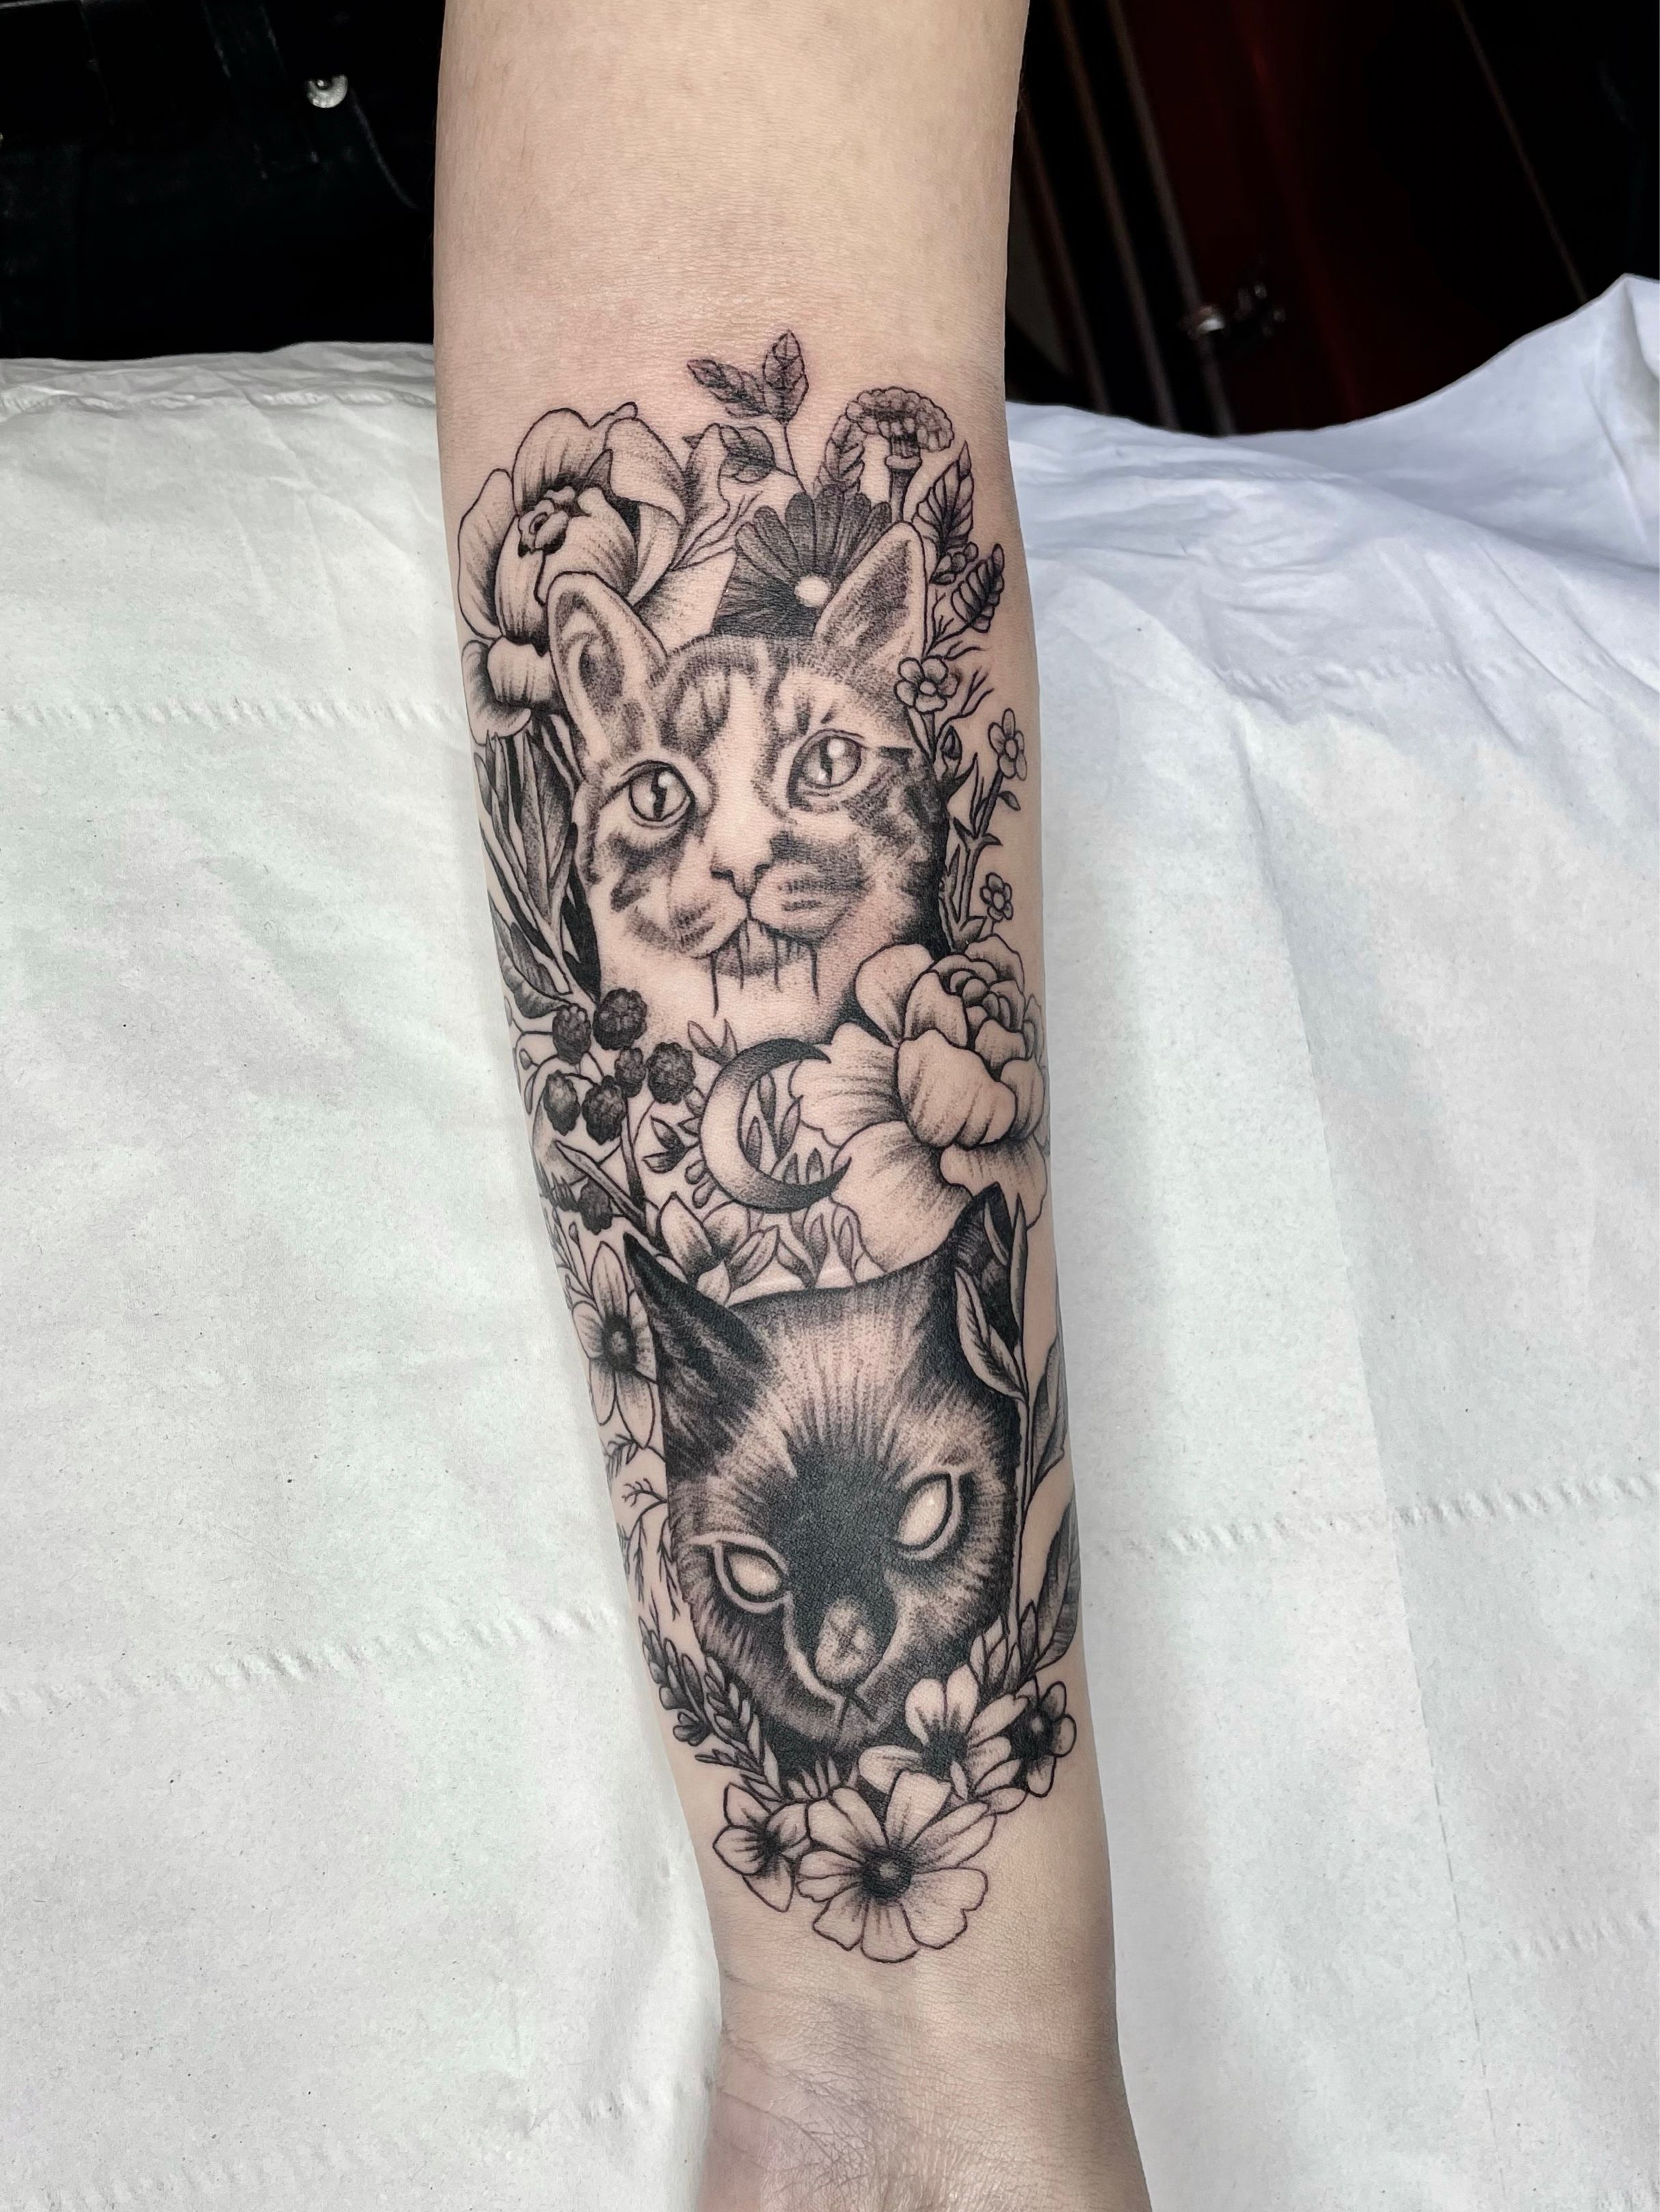 Cats and aliens. Both by Bryan Turnbull @ Government st tattoo. Victoria  British Columbia : r/tattoos